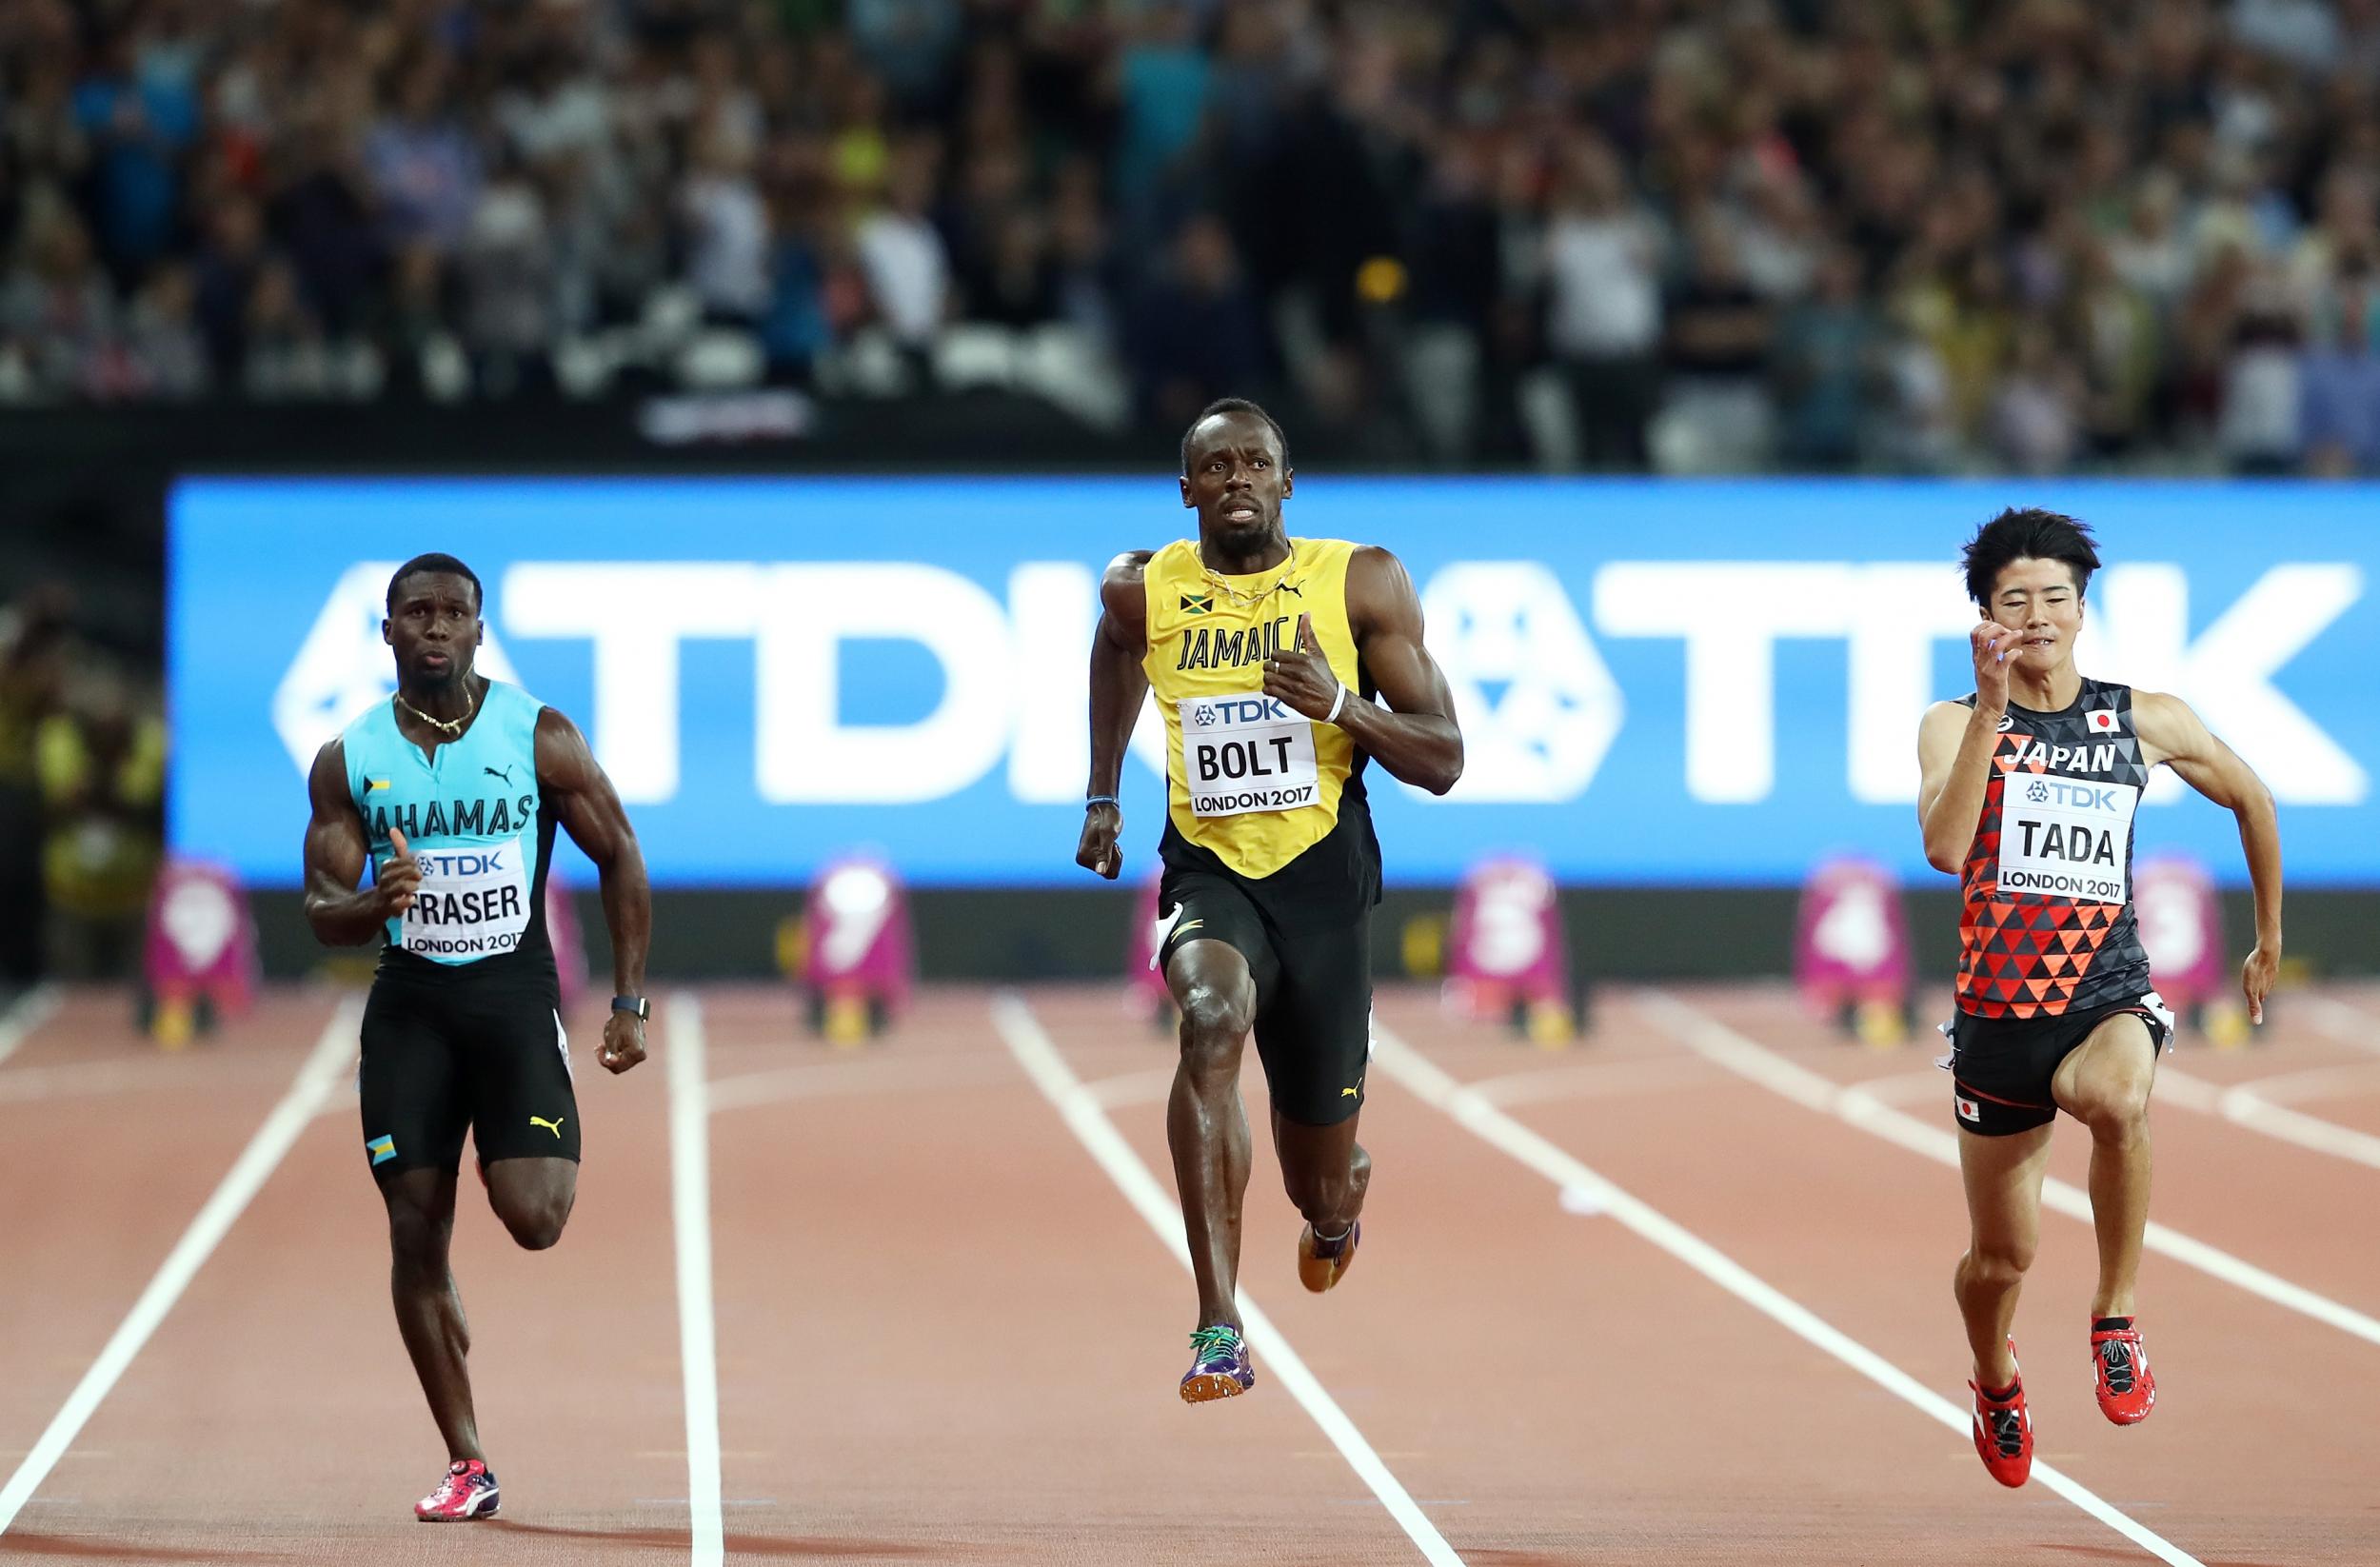 Usain Bolt ended his race with a shake of the head